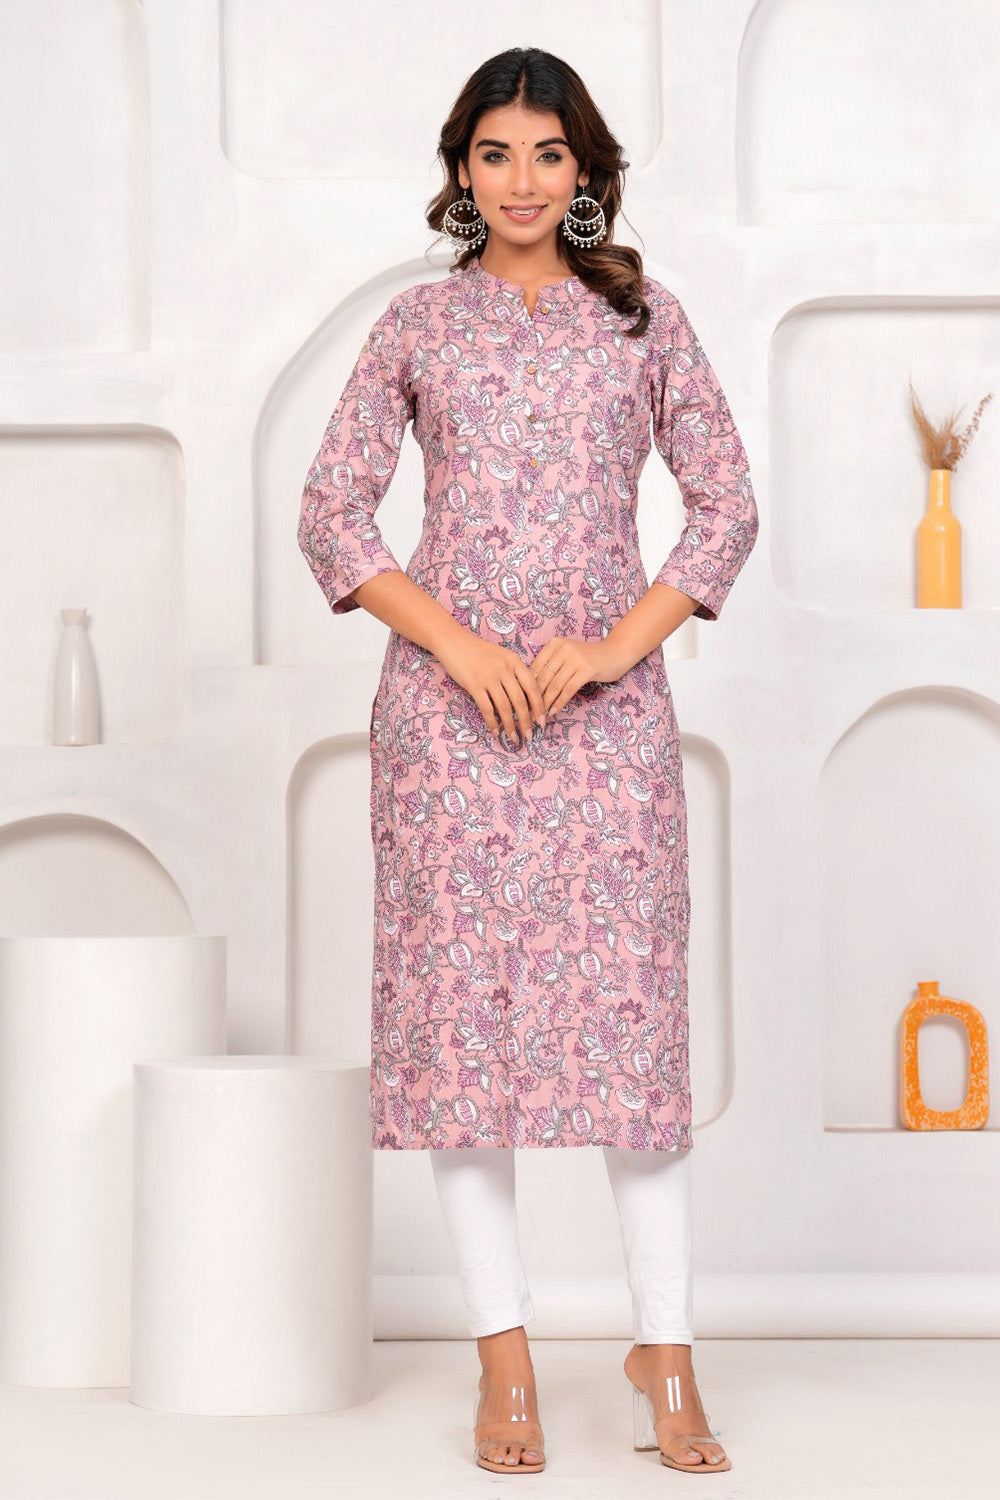 Dusty Pink Color Cotton Printed Long Kurti